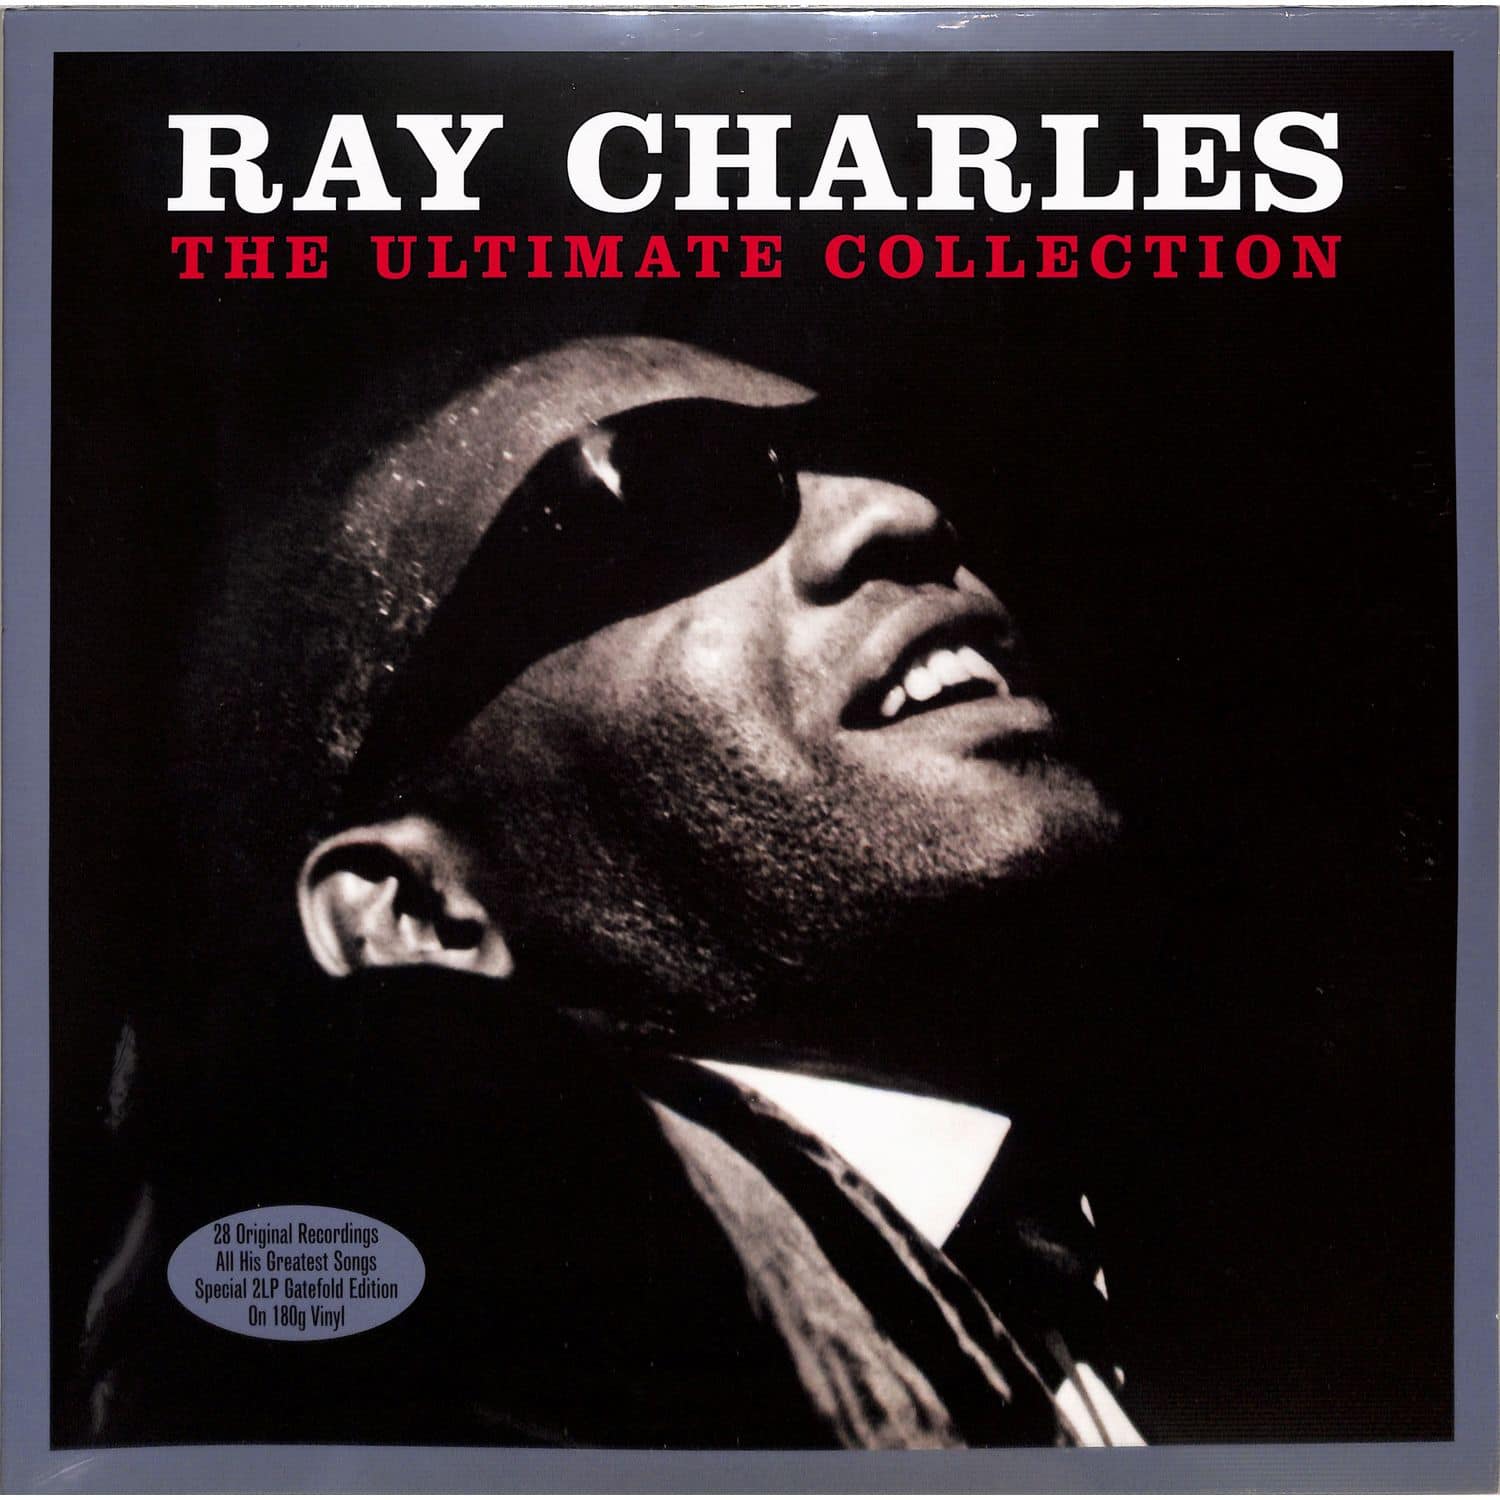 Ray Charles - THE ULTIMATE COLLECTION 